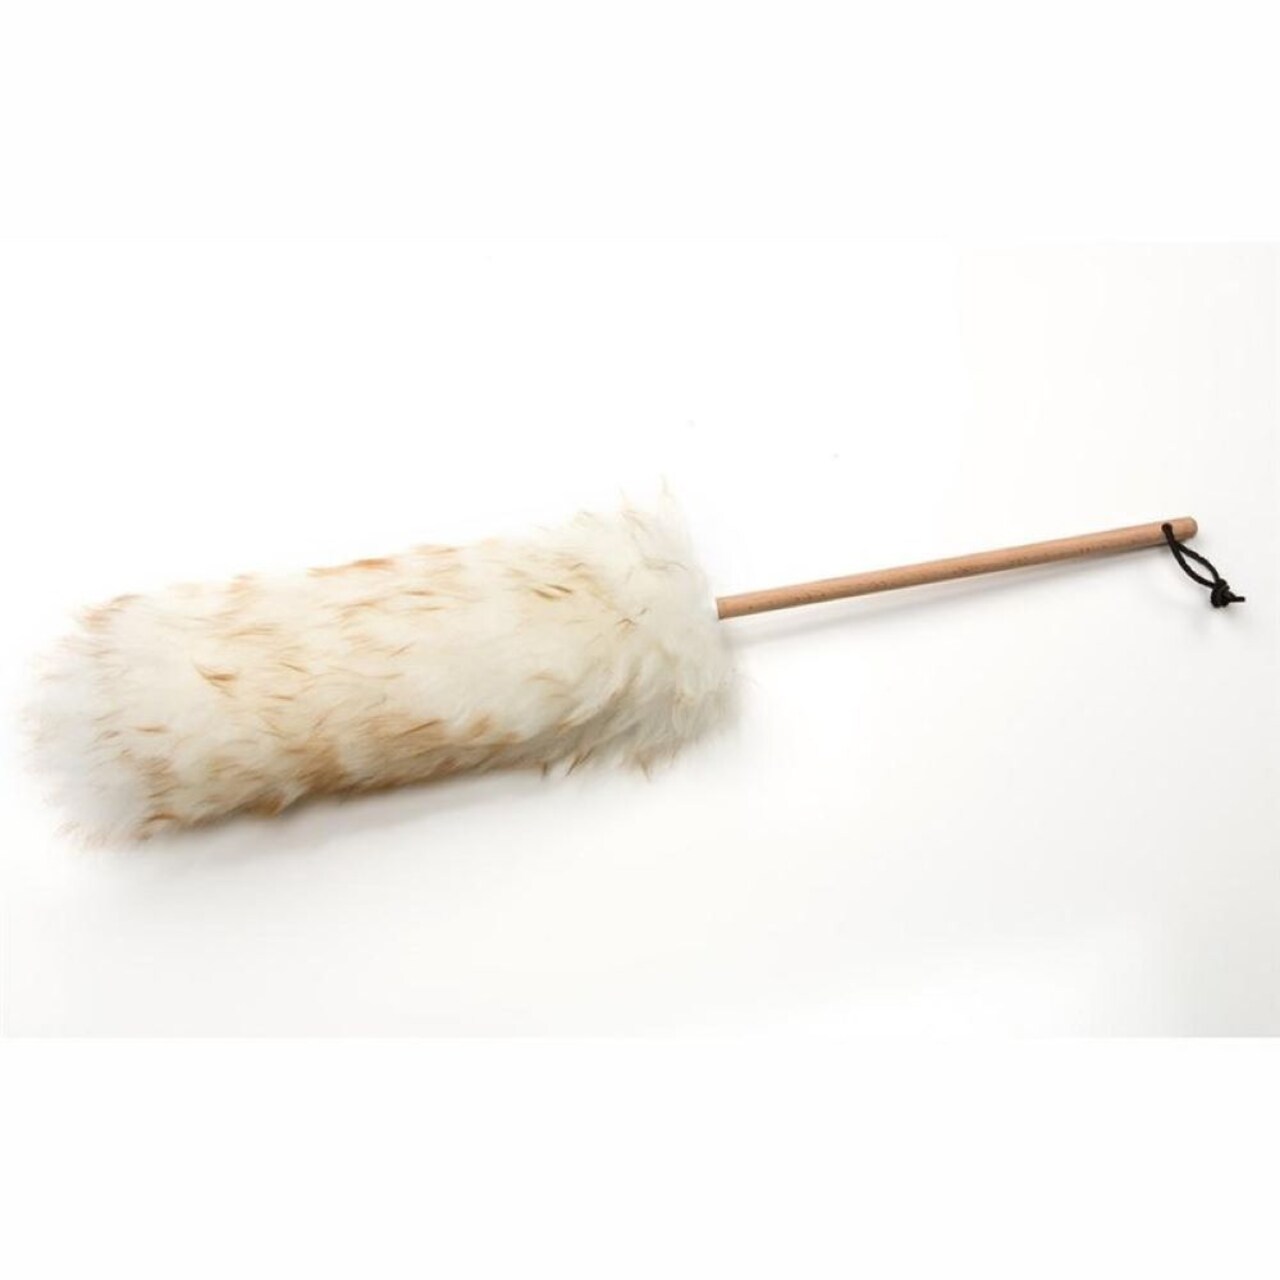 Wool Shop Lambswool Duster, 24 Inches with Wood Handle and Leather Hanger